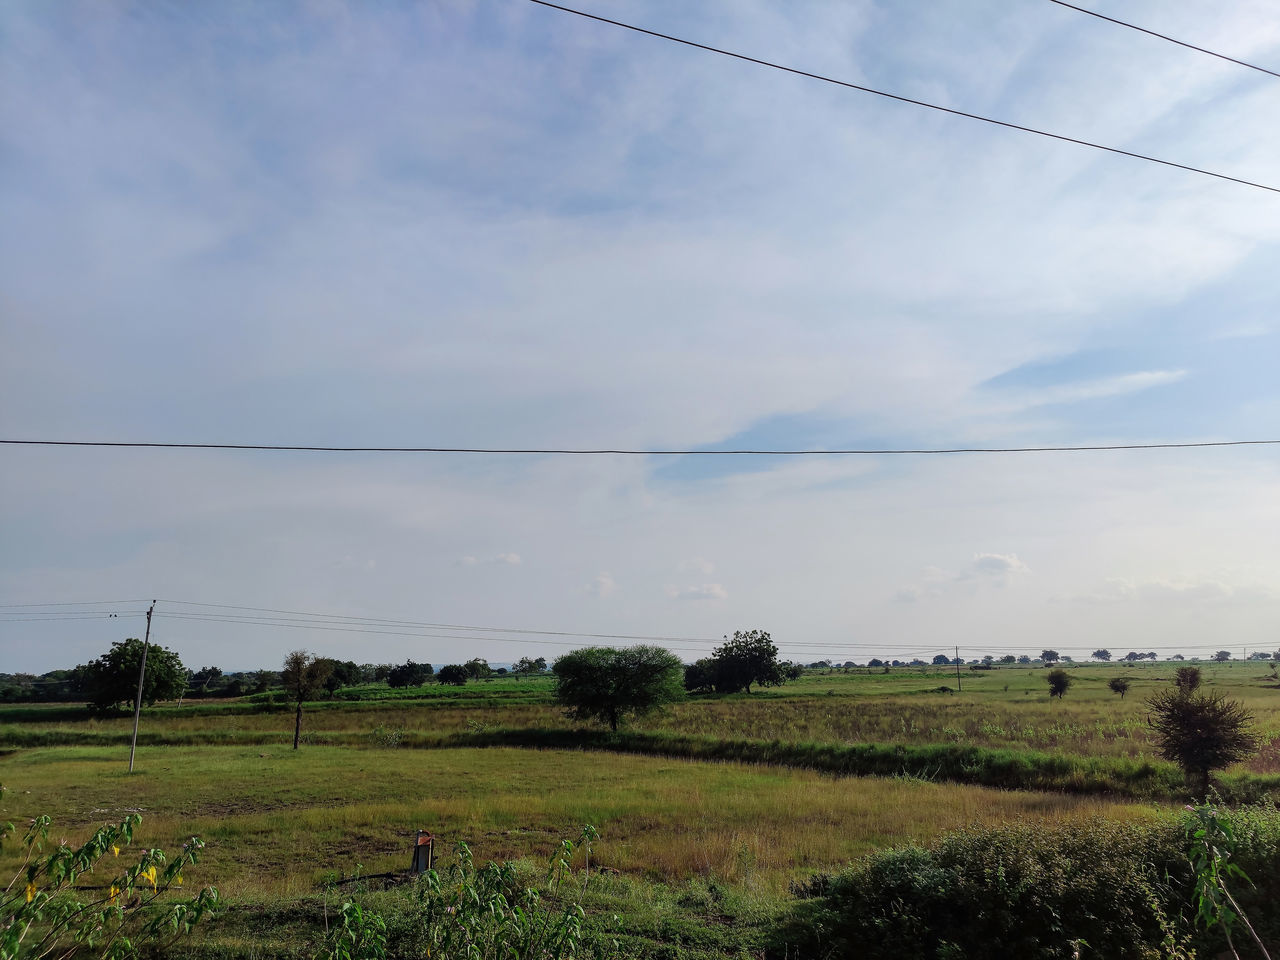 sky, cable, landscape, cloud, plant, electricity, environment, field, nature, rural area, land, power line, agriculture, horizon, rural scene, scenics - nature, no people, beauty in nature, plain, grass, electricity pylon, growth, power supply, tranquility, technology, hill, tree, tranquil scene, crop, prairie, day, outdoors, grassland, farm, non-urban scene, natural environment, pasture, green, soil